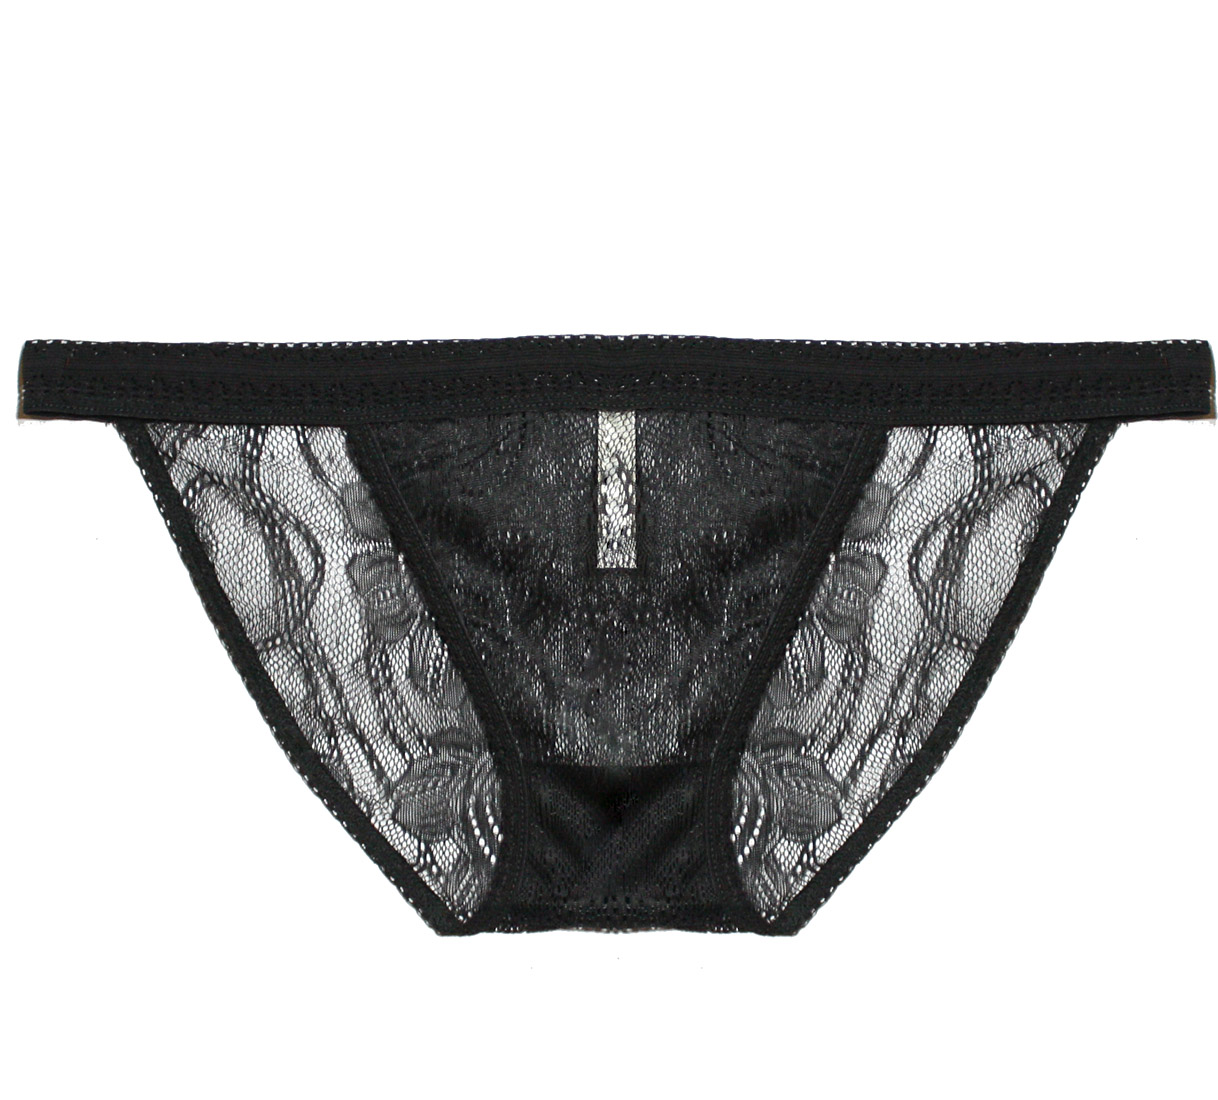 Petal Play Bikini in Black | Luxurious Black Lace Lingerie | Between the Sheets Fine Intimates 